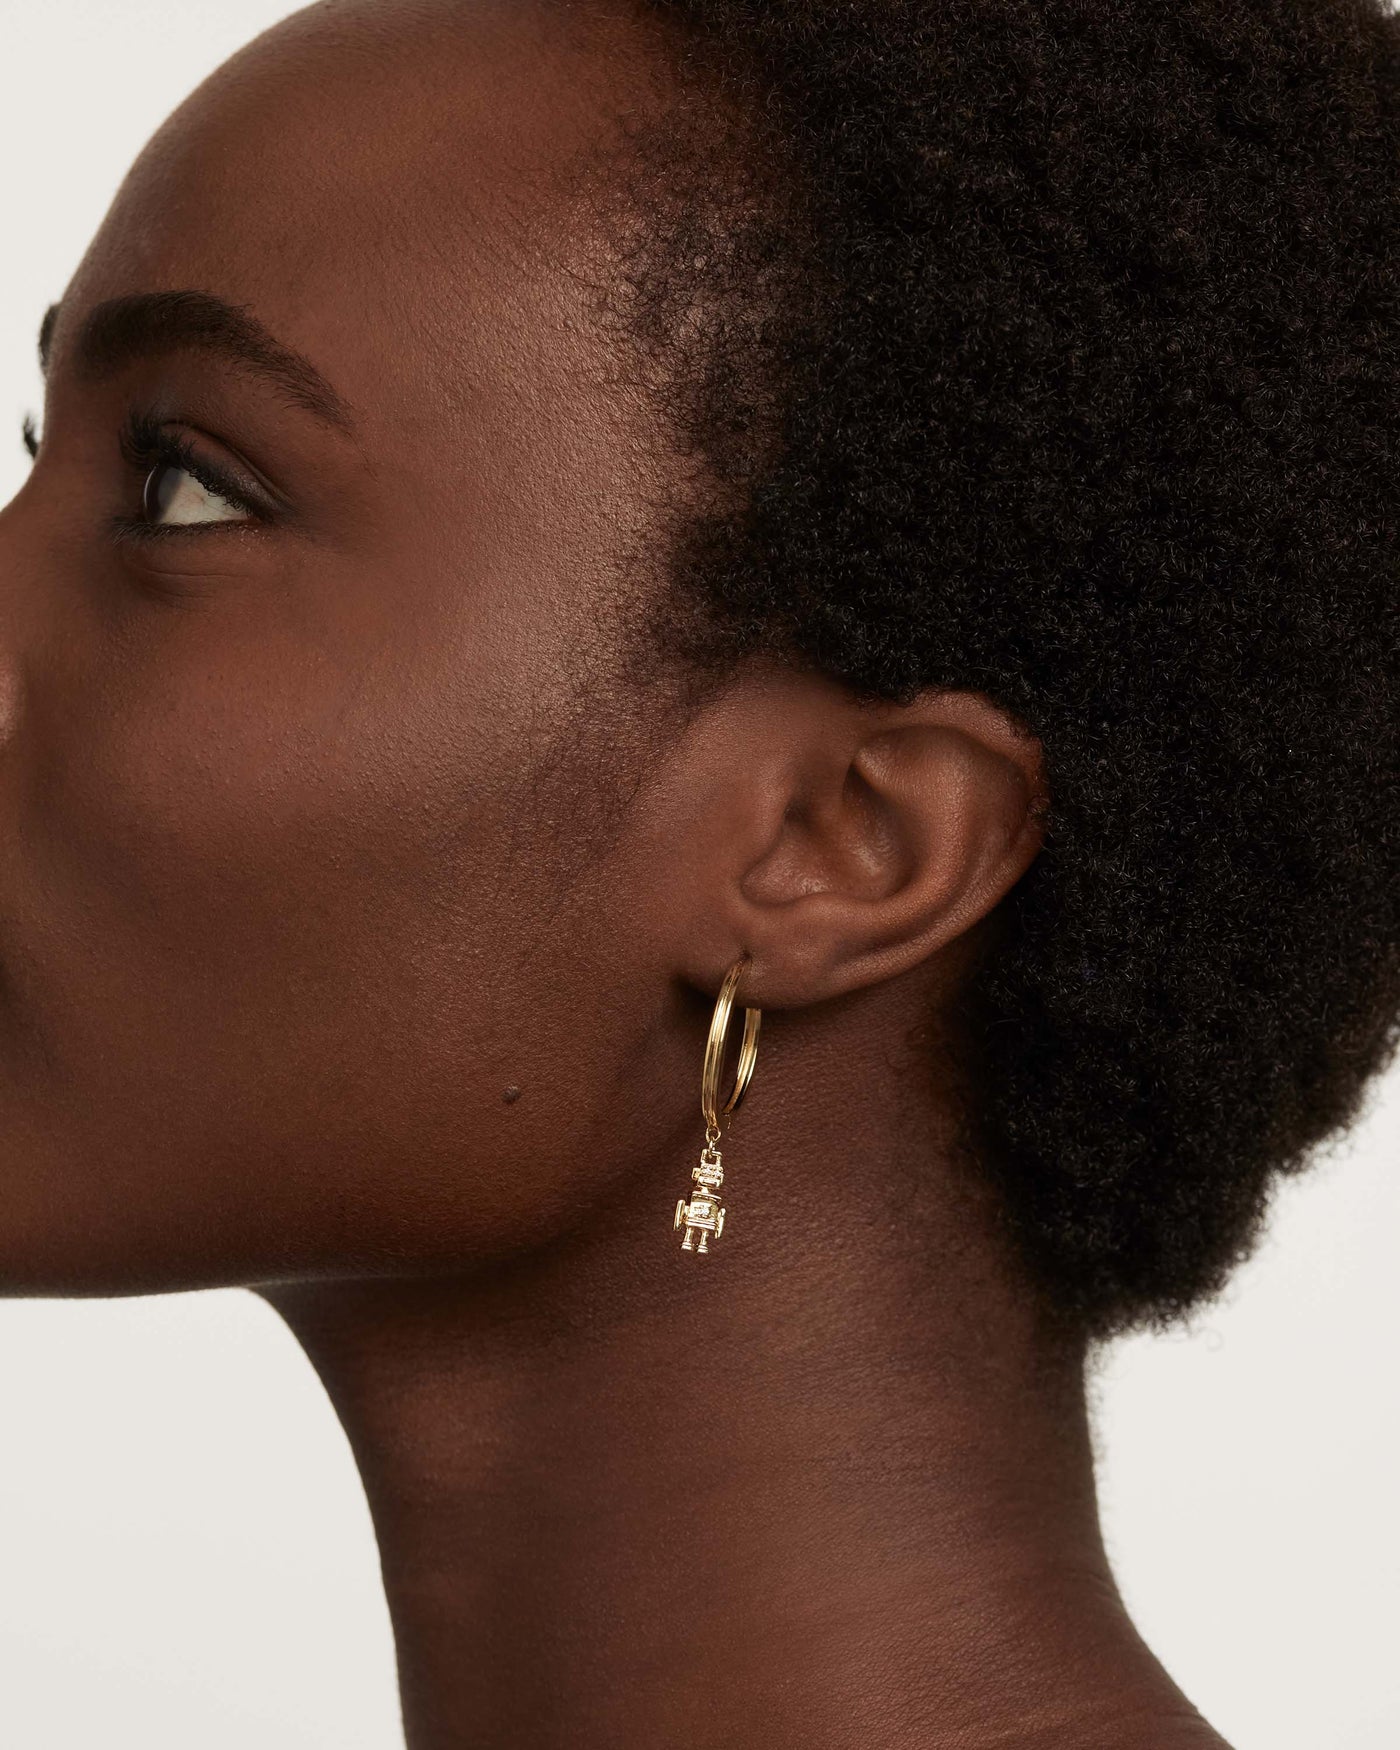 African Spiral Semi-Circle Earrings/ Aged Gold | Elevate Your Style:  Fashion Jewelry, Hoop Earrings, Spiral Swirls, Circle Marvels, African  Artistry, Statement Wonders, Tribal Allure, Boho-Chic Bliss, Chunky  Marvels, Oversized Glam, and Dazzling